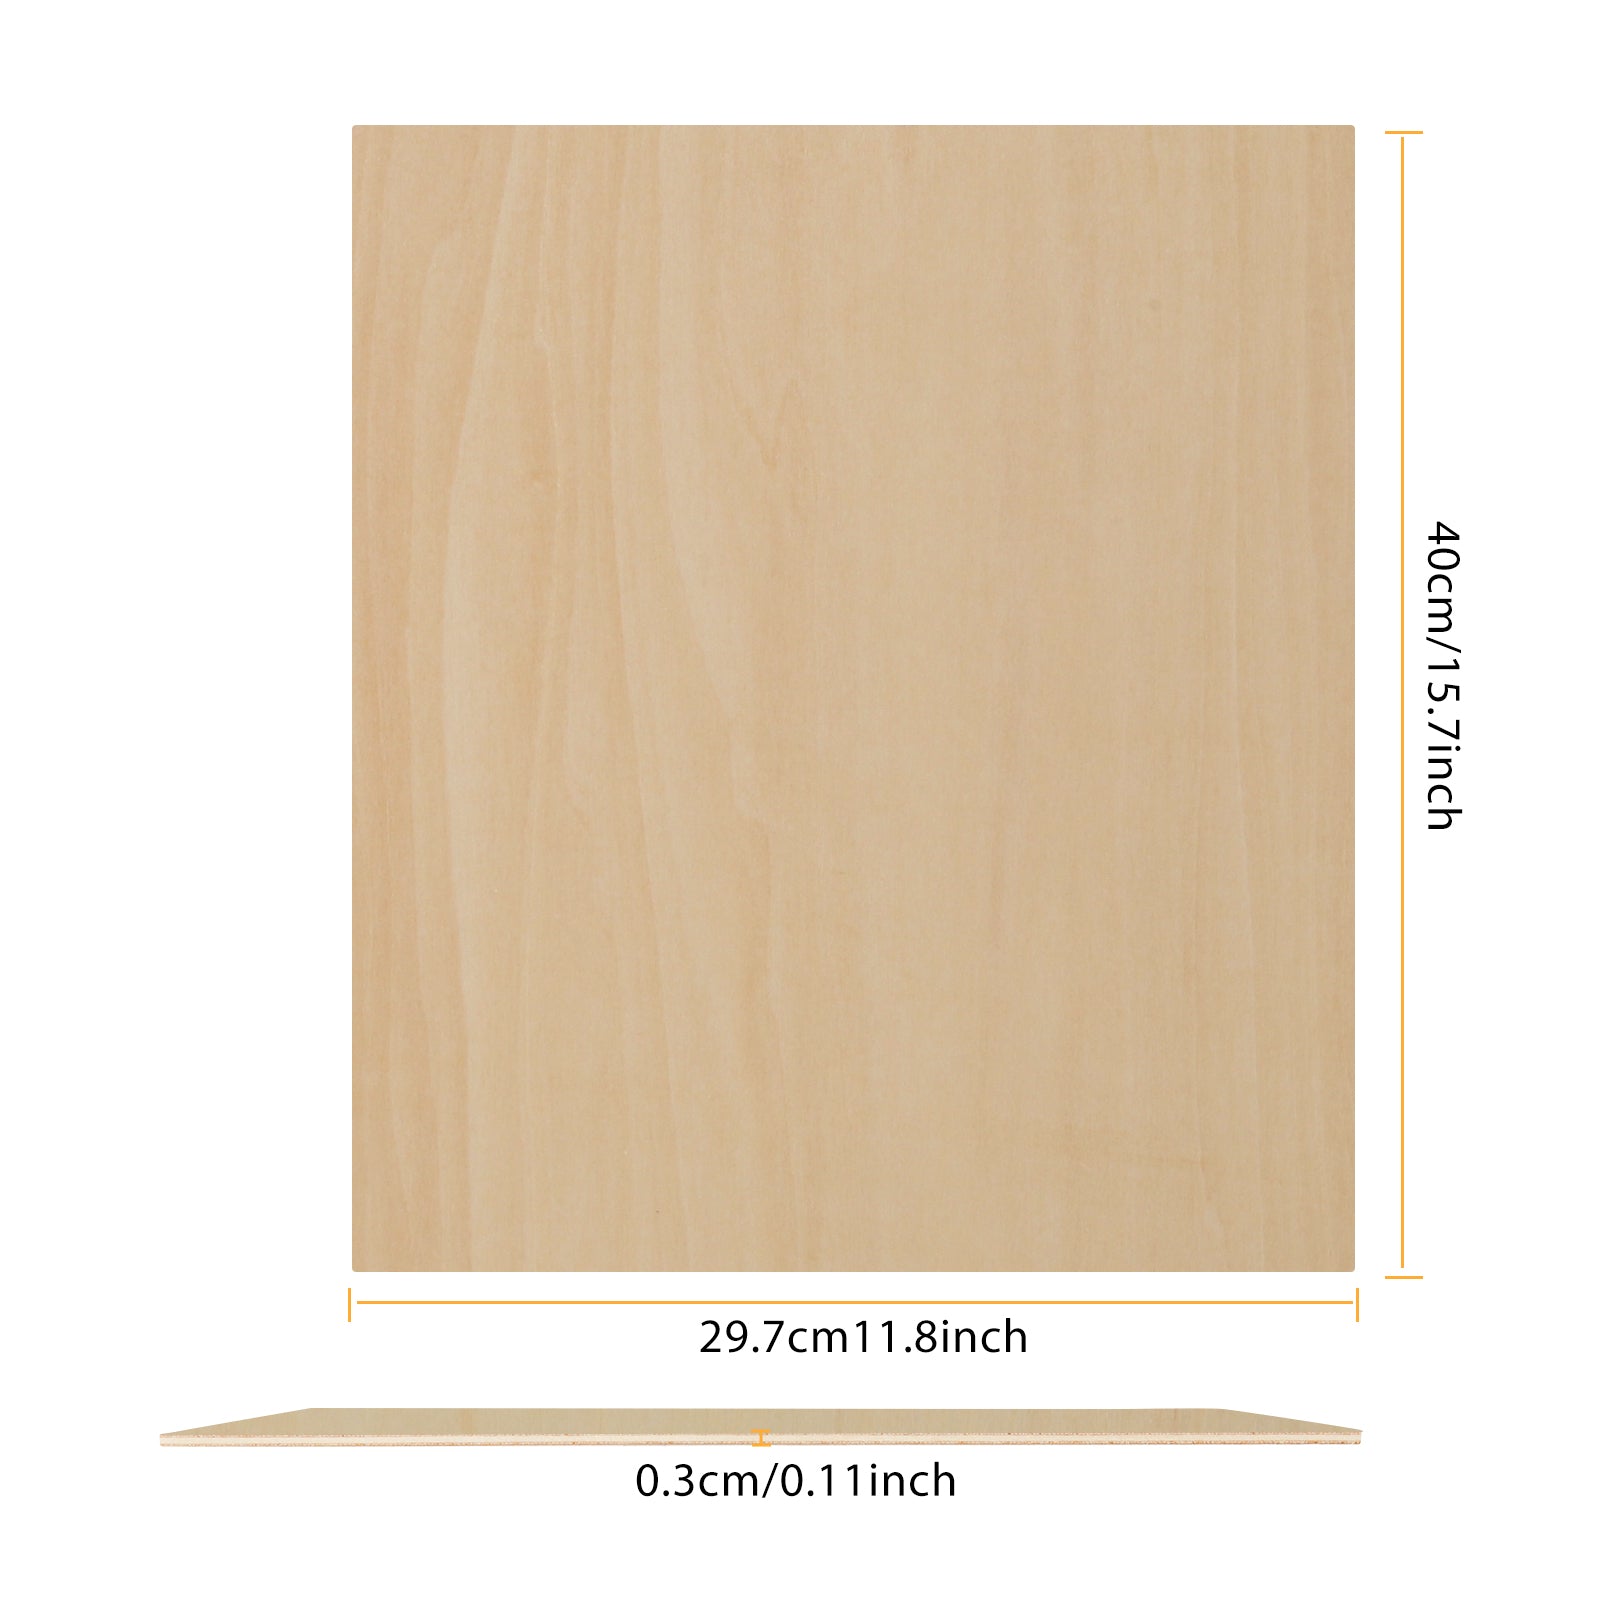 10pcs A3 Plywood Sheets 3mm Thickness (+/- 0.2mm) Basswood Plywood 29.7*42*0.3cm for Engraving